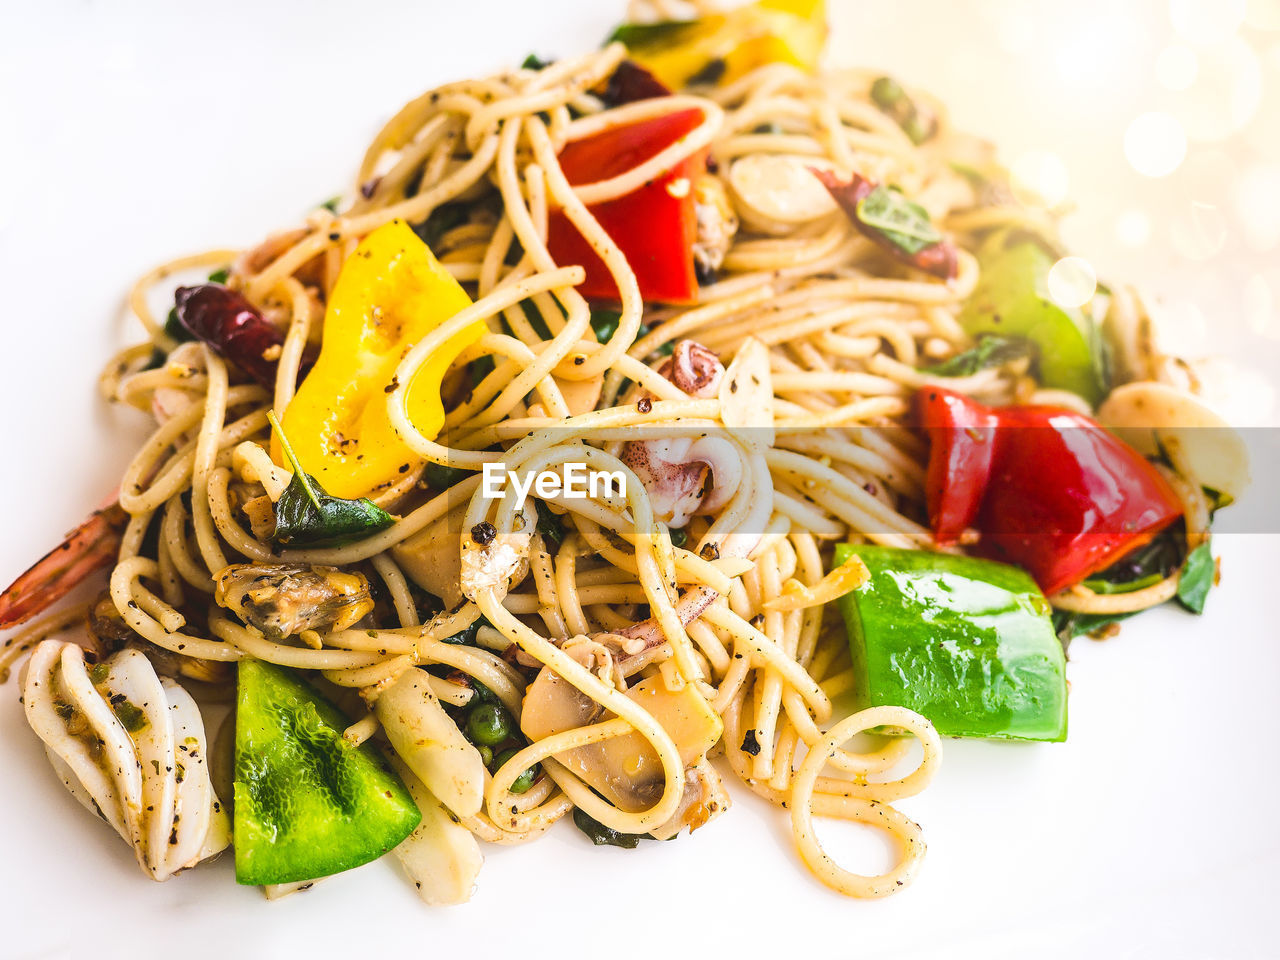 Spaghetti black olive pepper with seafoods / isolated